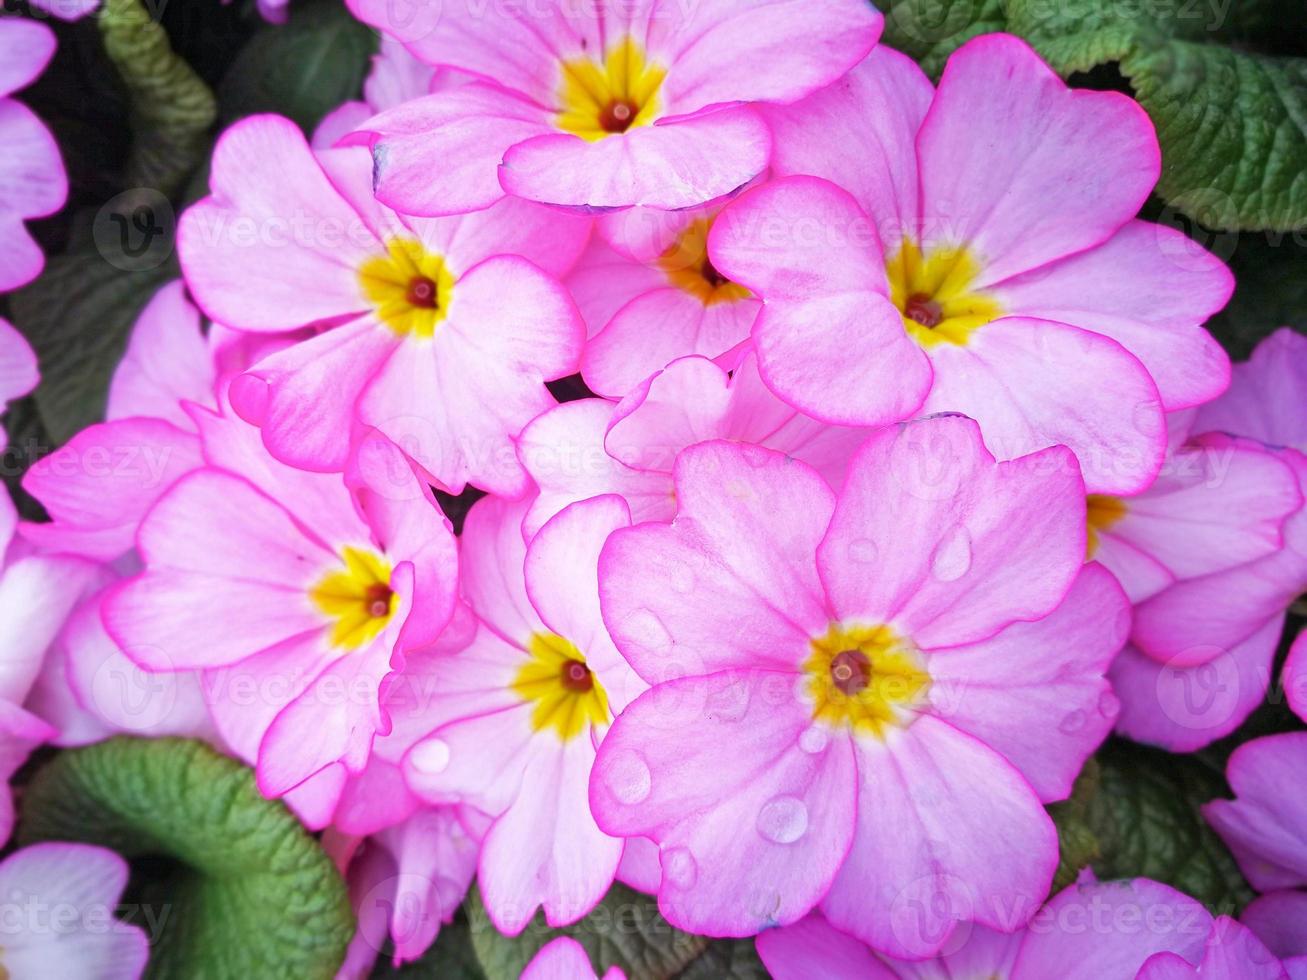 Lovely pink Primula flowers with water droplets after a rain shower photo